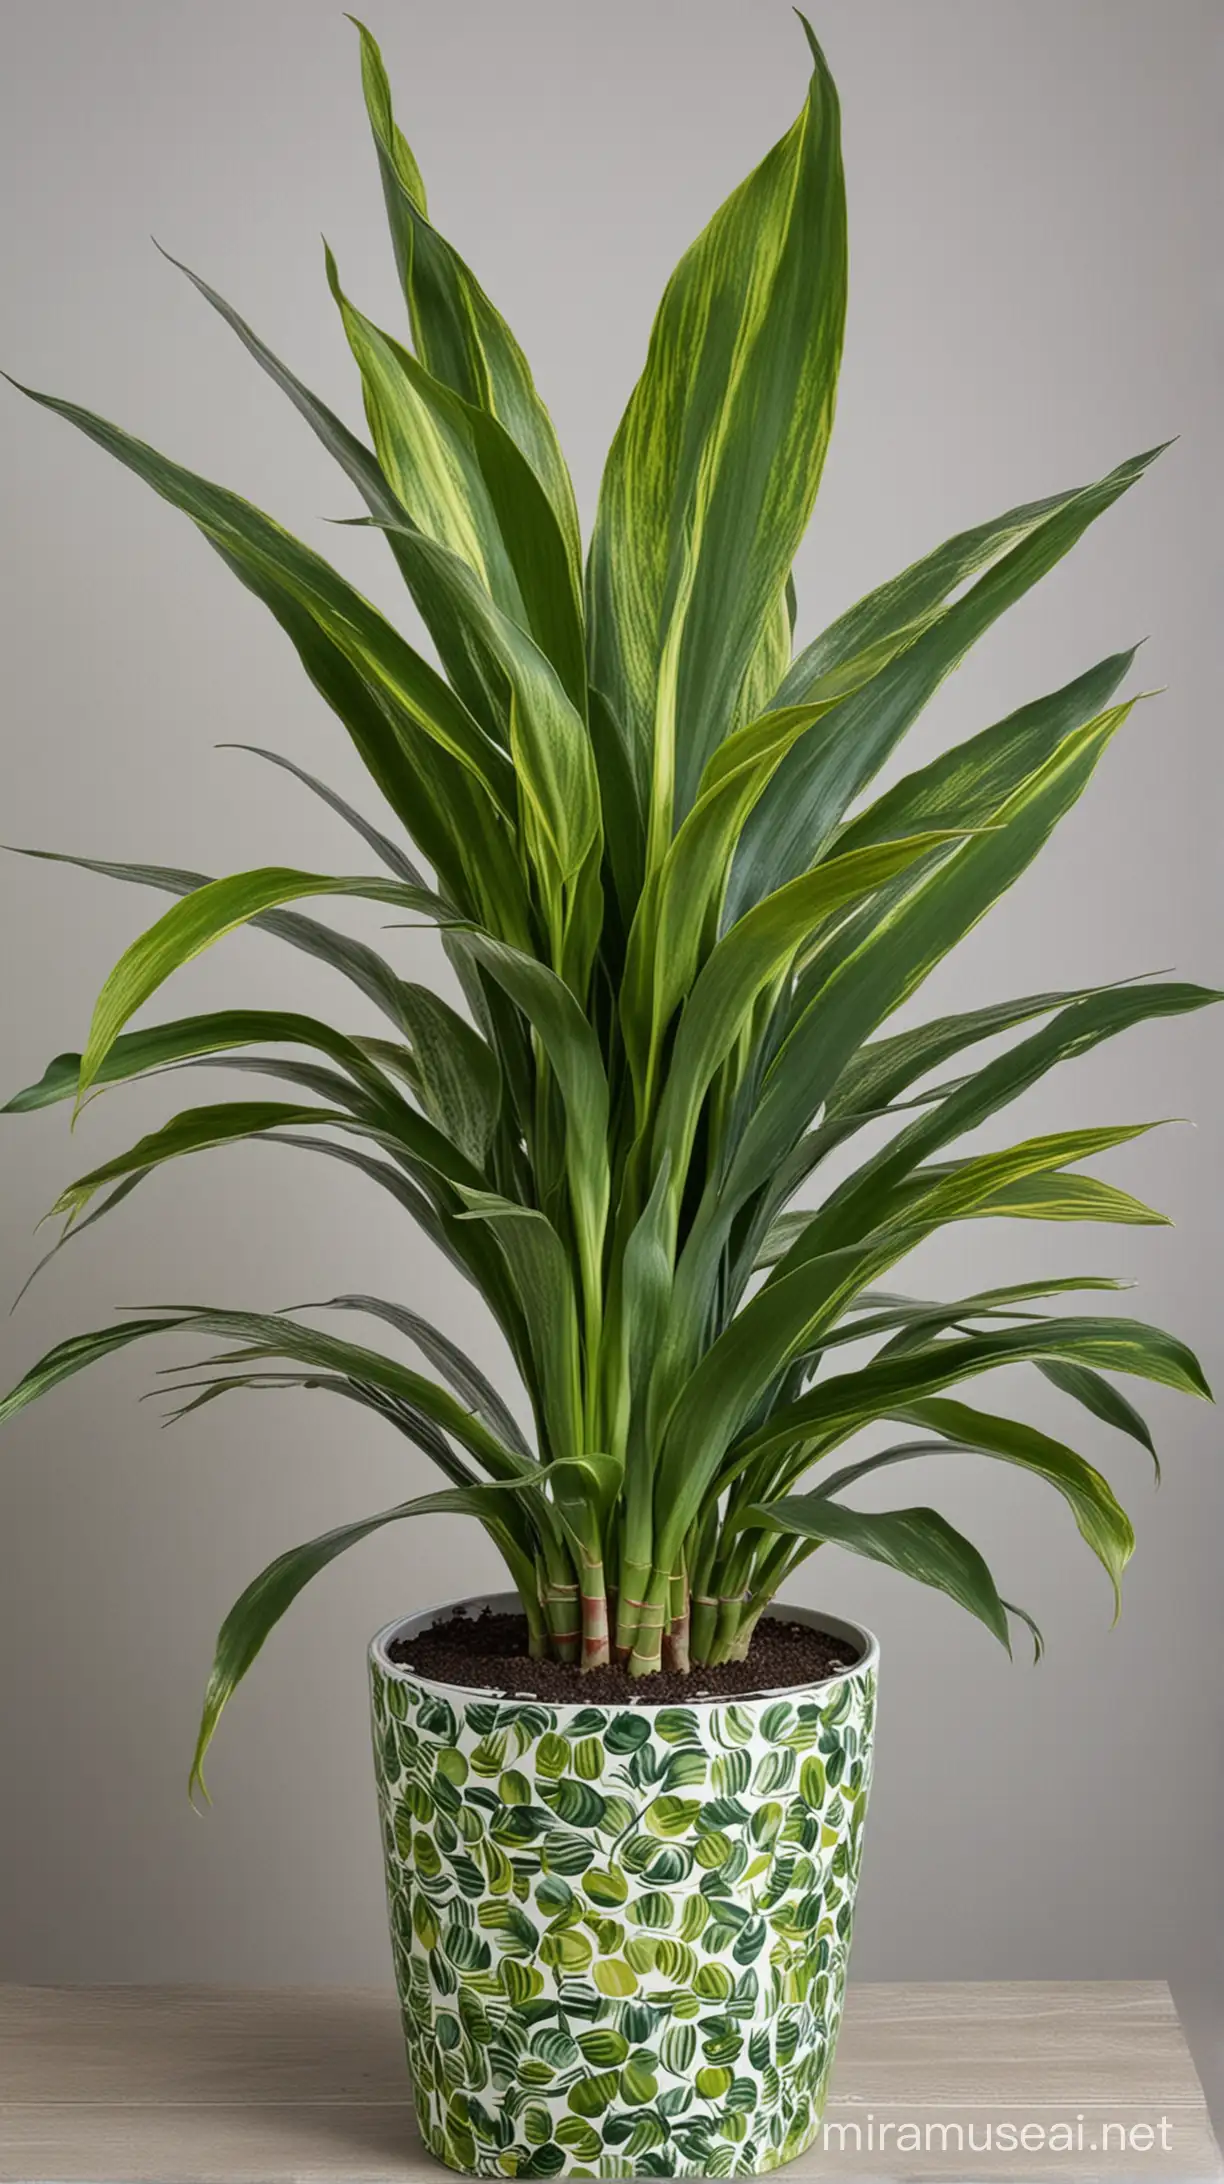  a lush snake plant gracefully growing in a beautifully decorated pot, bringing a touch of natural elegance to any room it inhabits. Describe the vibrant green leaves, the sturdy yet graceful posture of the plant, and the way it effortlessly brightens up its surroundings with its presence."